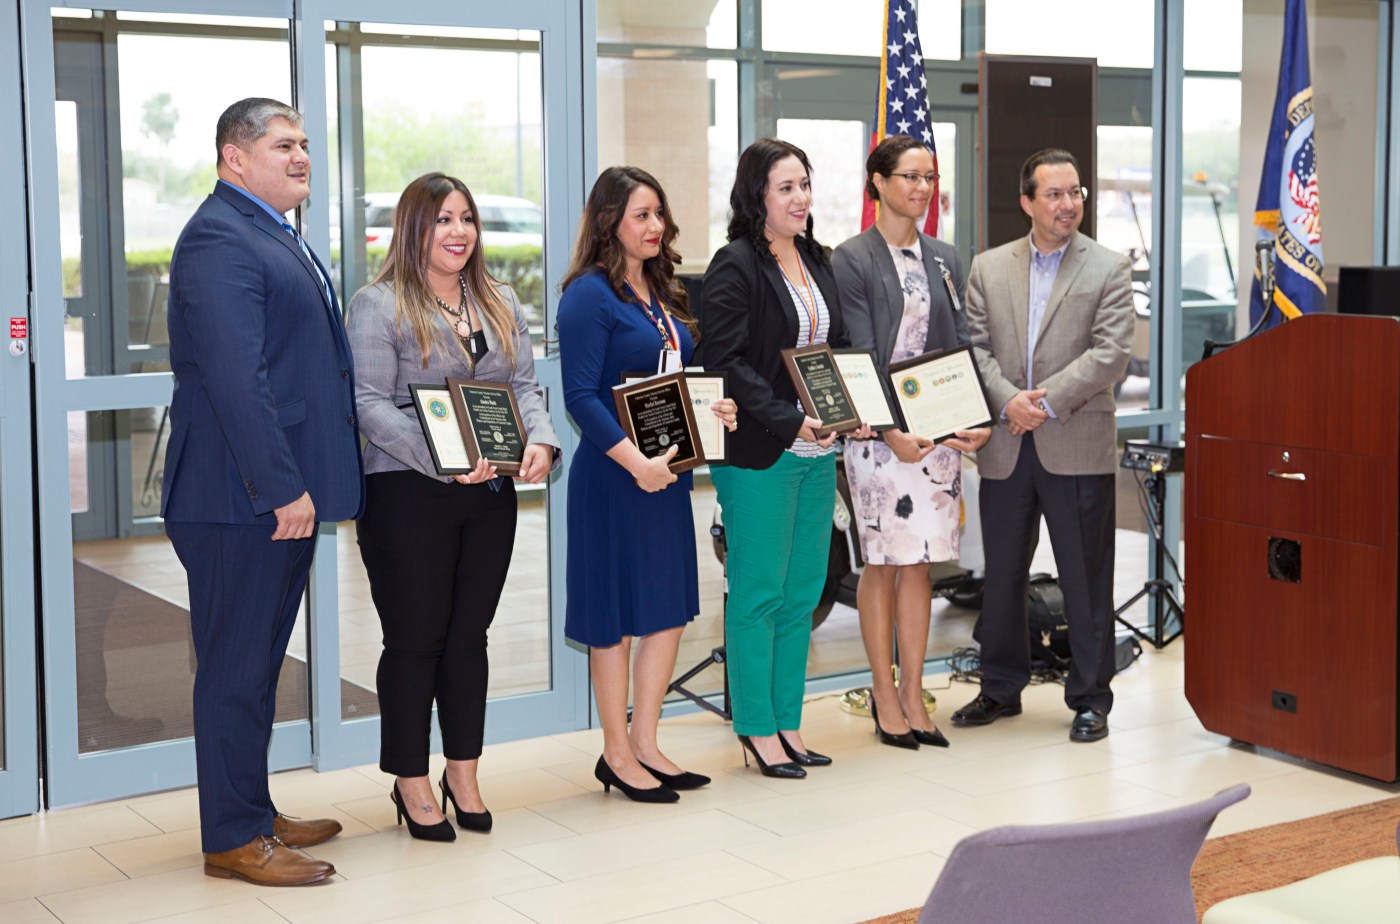 (At center) VA social workers Alondra Muñiz, Maribel Barcenas, Cynthia Gonzalez and VA psychologist Dr. Yasisca Pujols, pose for a group photo with Cameron County judge Eddie Treviño Jr. and Salvador J. Castillo, Cameron County Veterans service officer during a special awards ceremony held March 13, 2018, at the VA Health Care Center at Harlingen, Texas. The four Texas Valley Coastal Bend Health Care System employees were recognized by Cameron County officials for their outstanding work with Veterans.